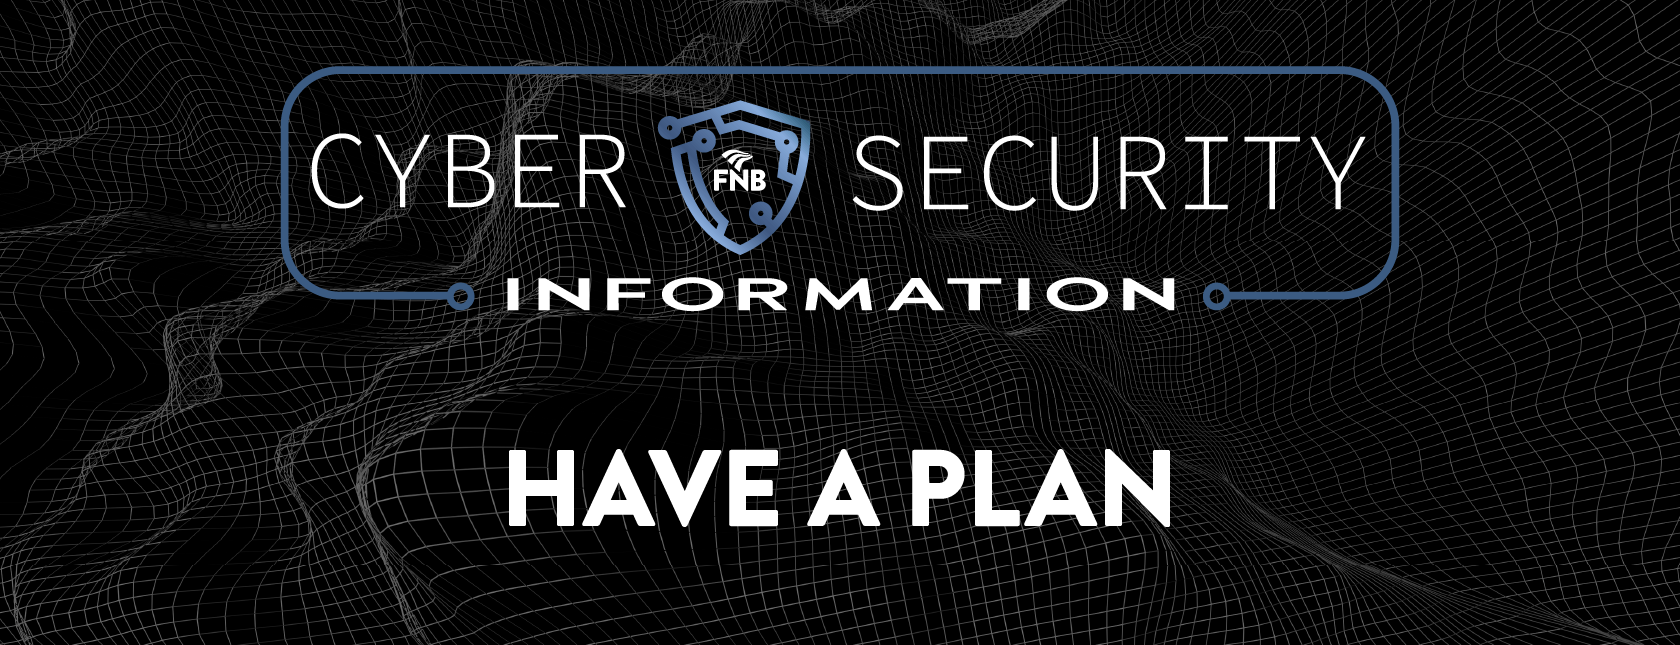 Cybersecurity Info: Have a plan